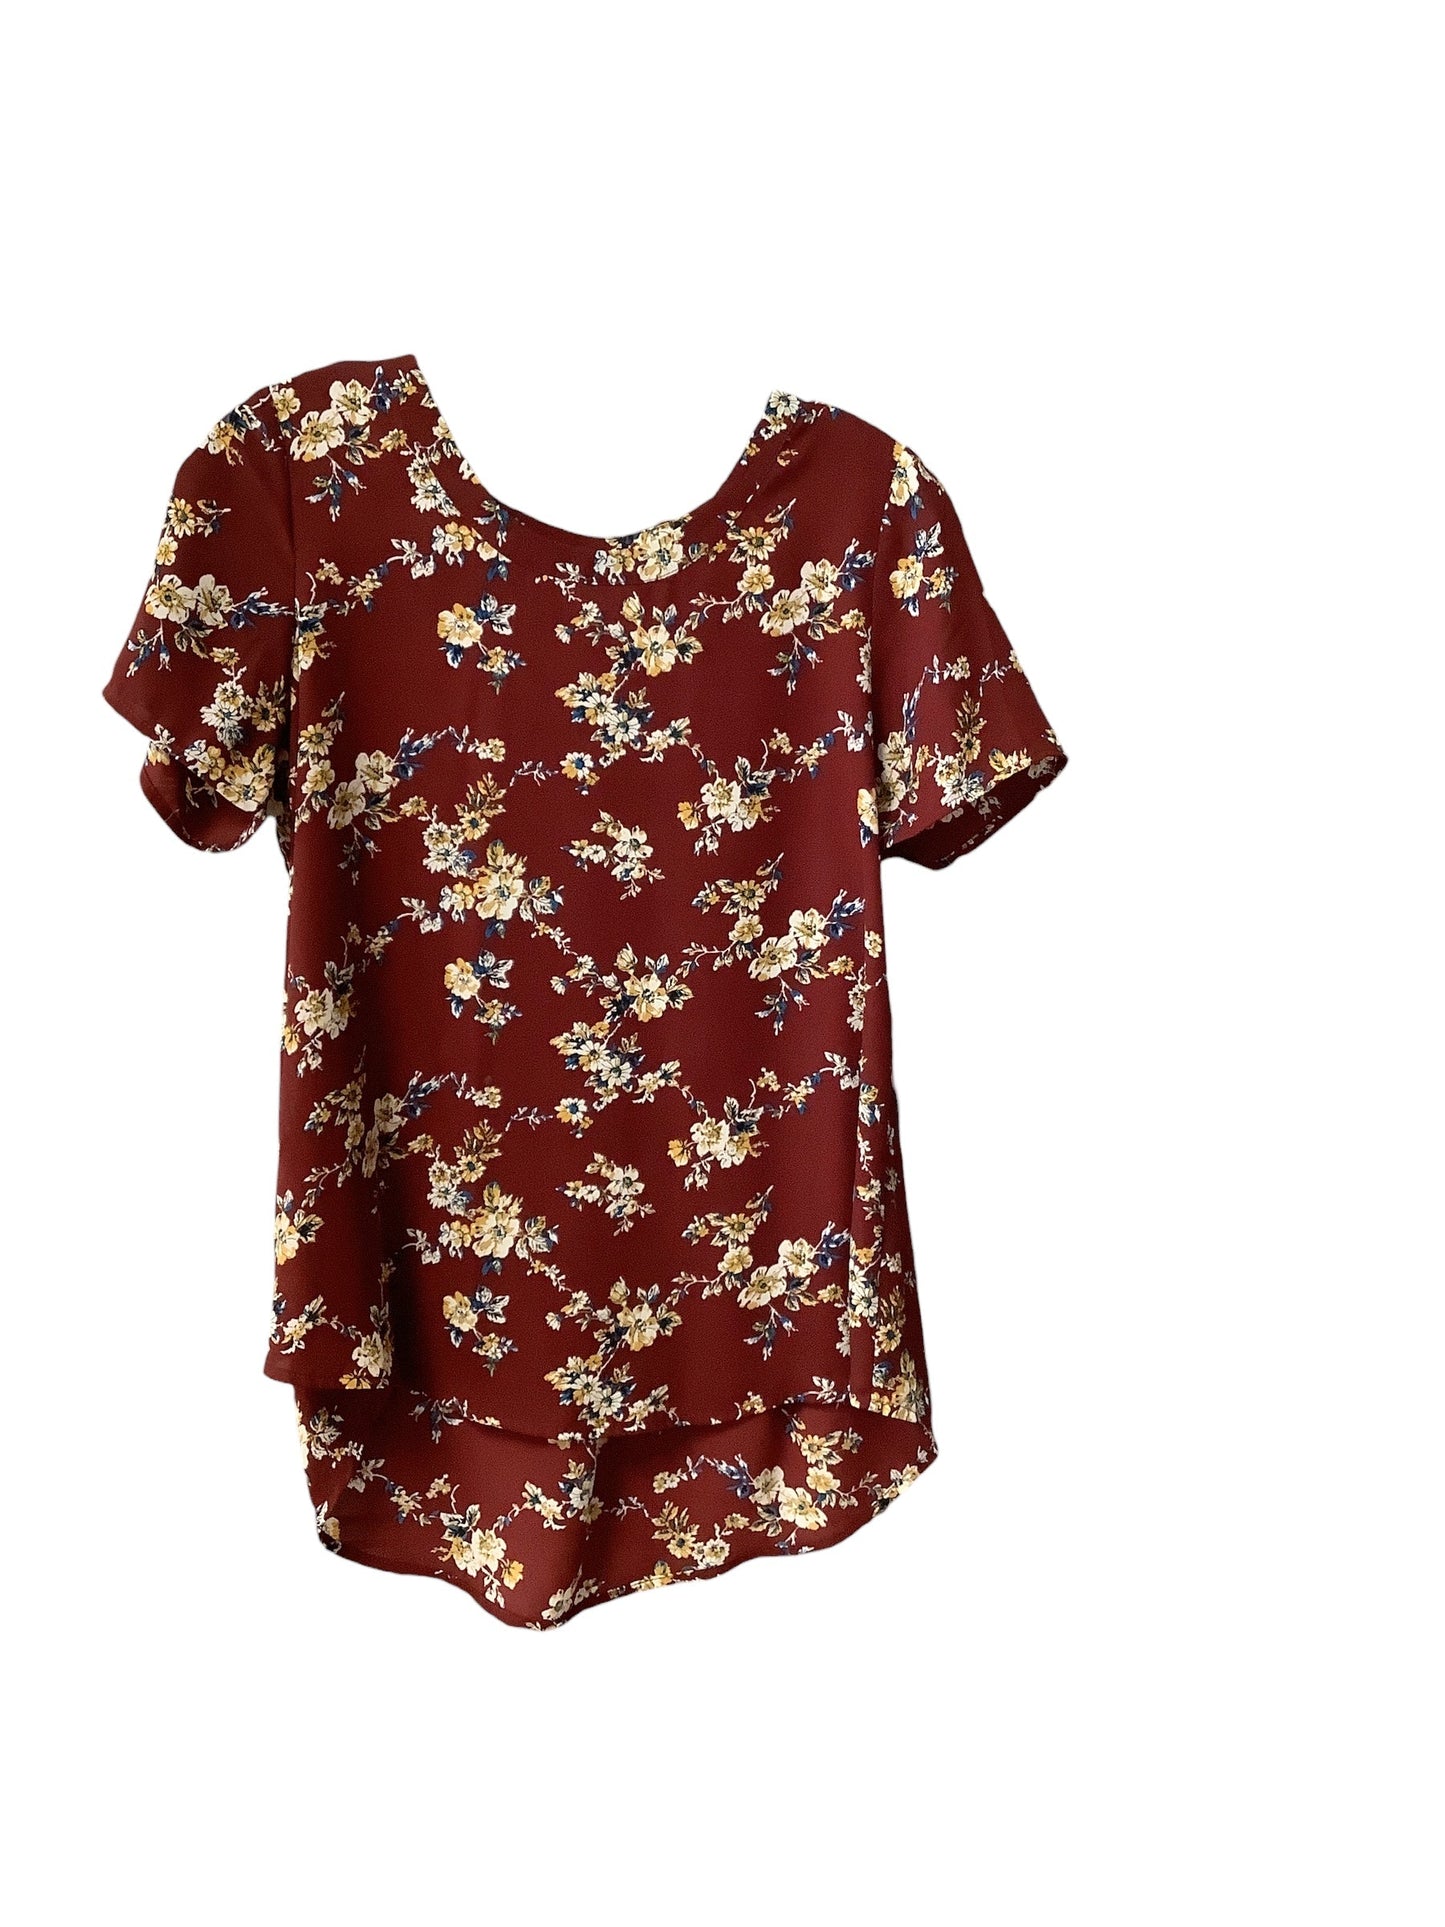 Floral Print Top Short Sleeve Sienna Sky, Size Xs